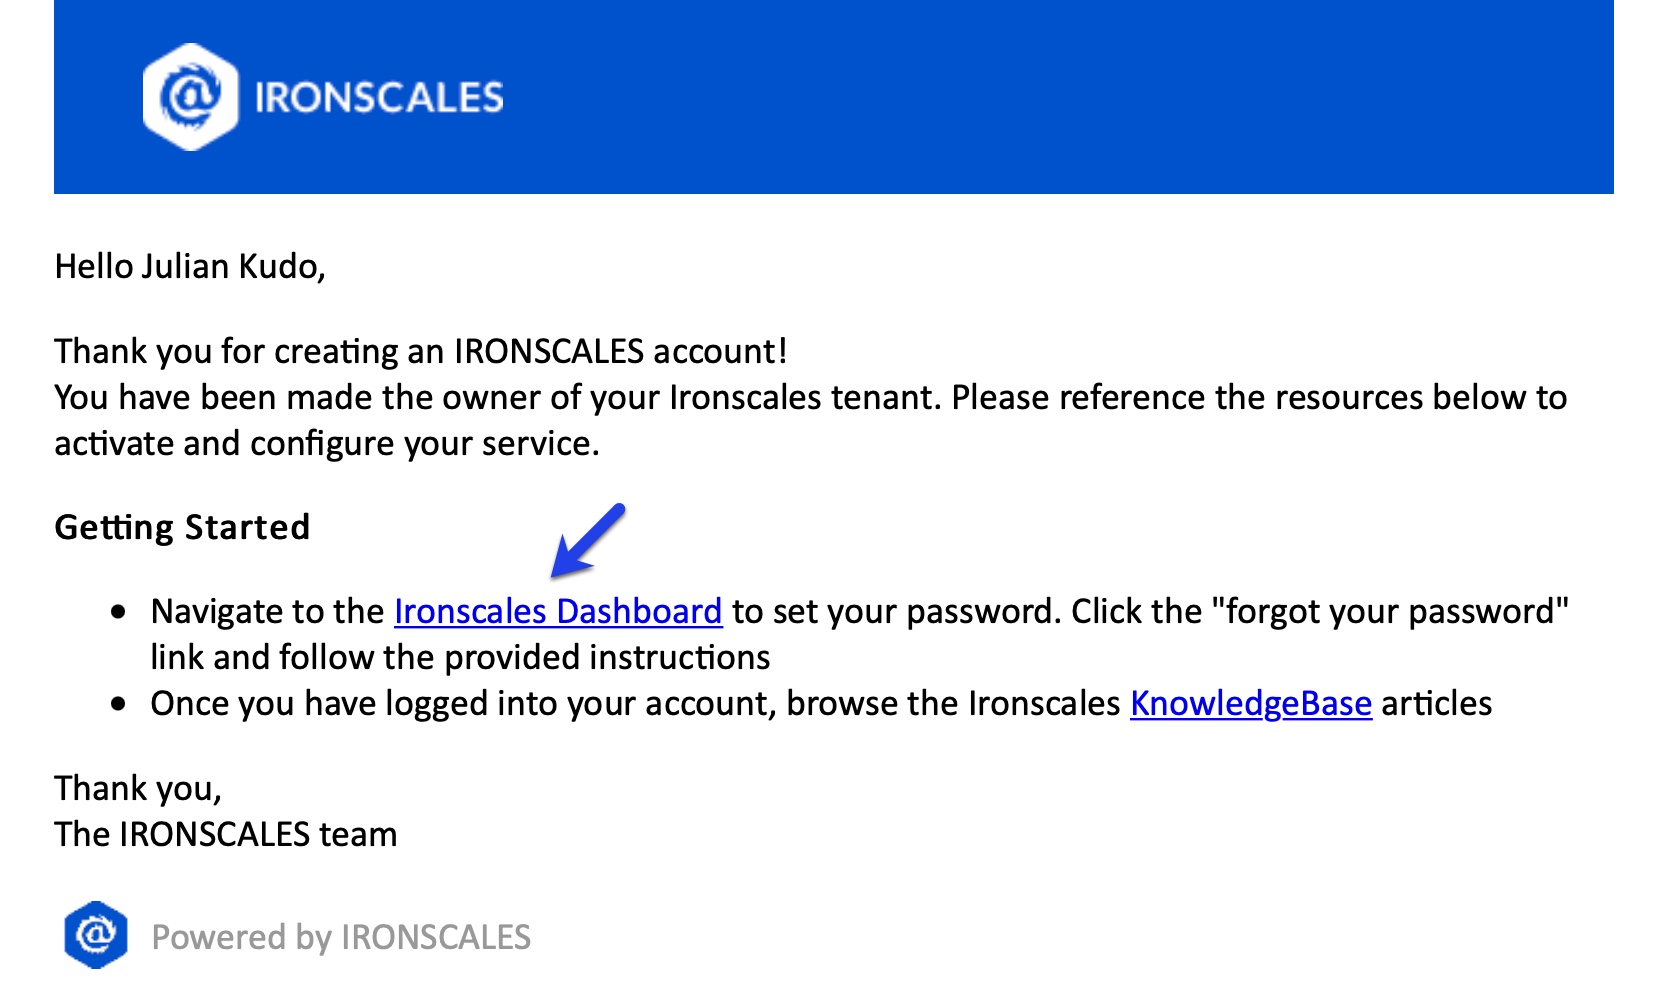 IRONSCALES_email_-_IT.jpg